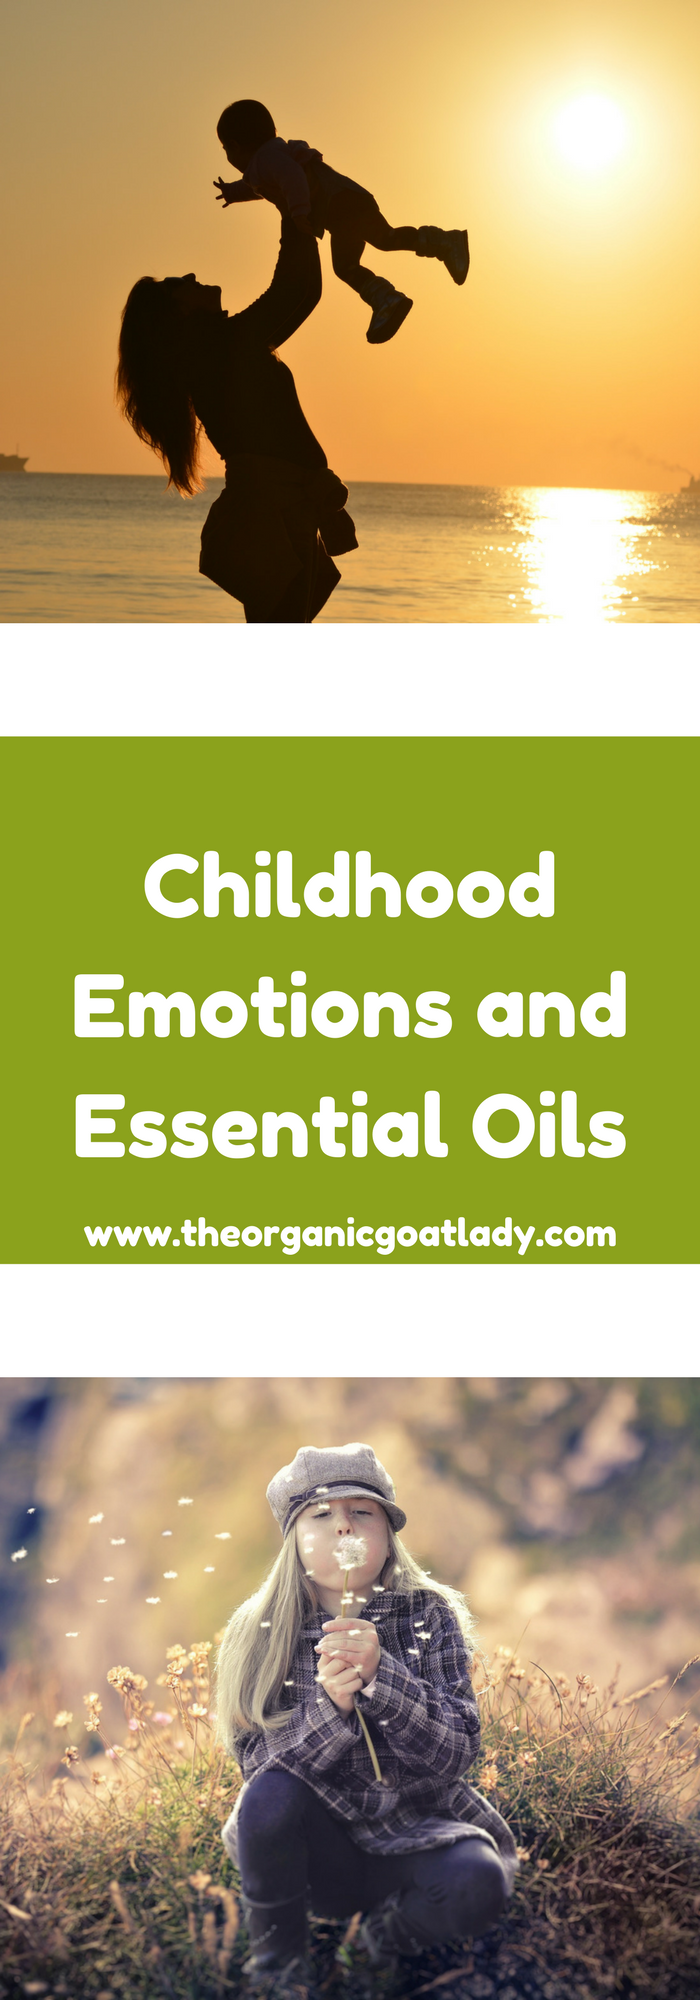 Childhood Emotions and Essential Oils 